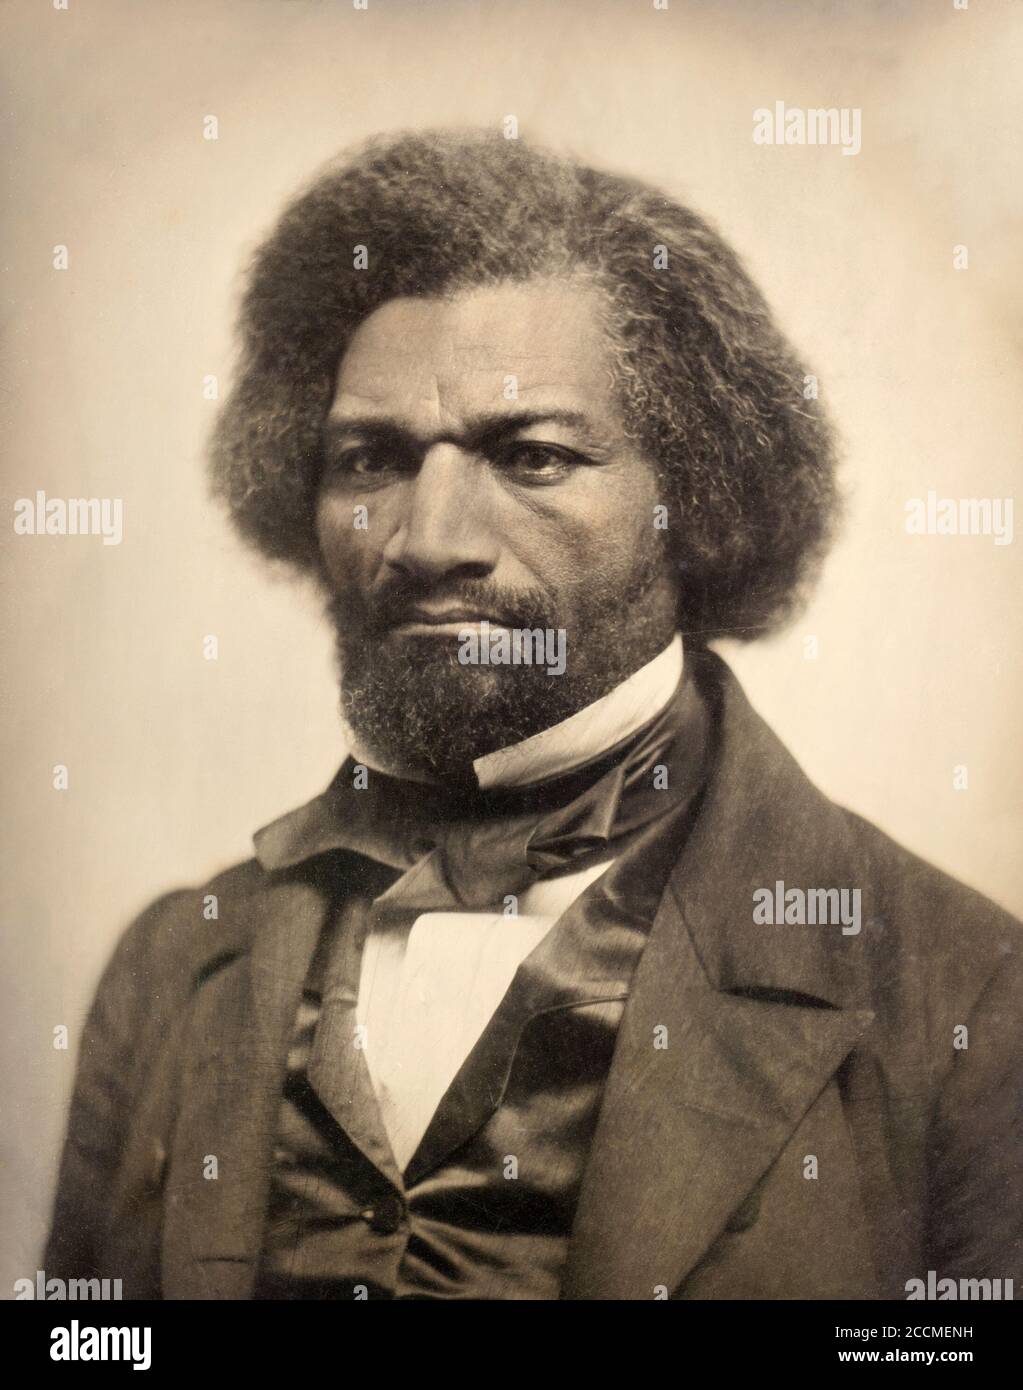 Portrait of Frederick Douglass (1818-1895), daguerrotype, 1856.  Douglass, a former slave, was an American social reformer, abolitionist, orator, writer, and statesman Stock Photo